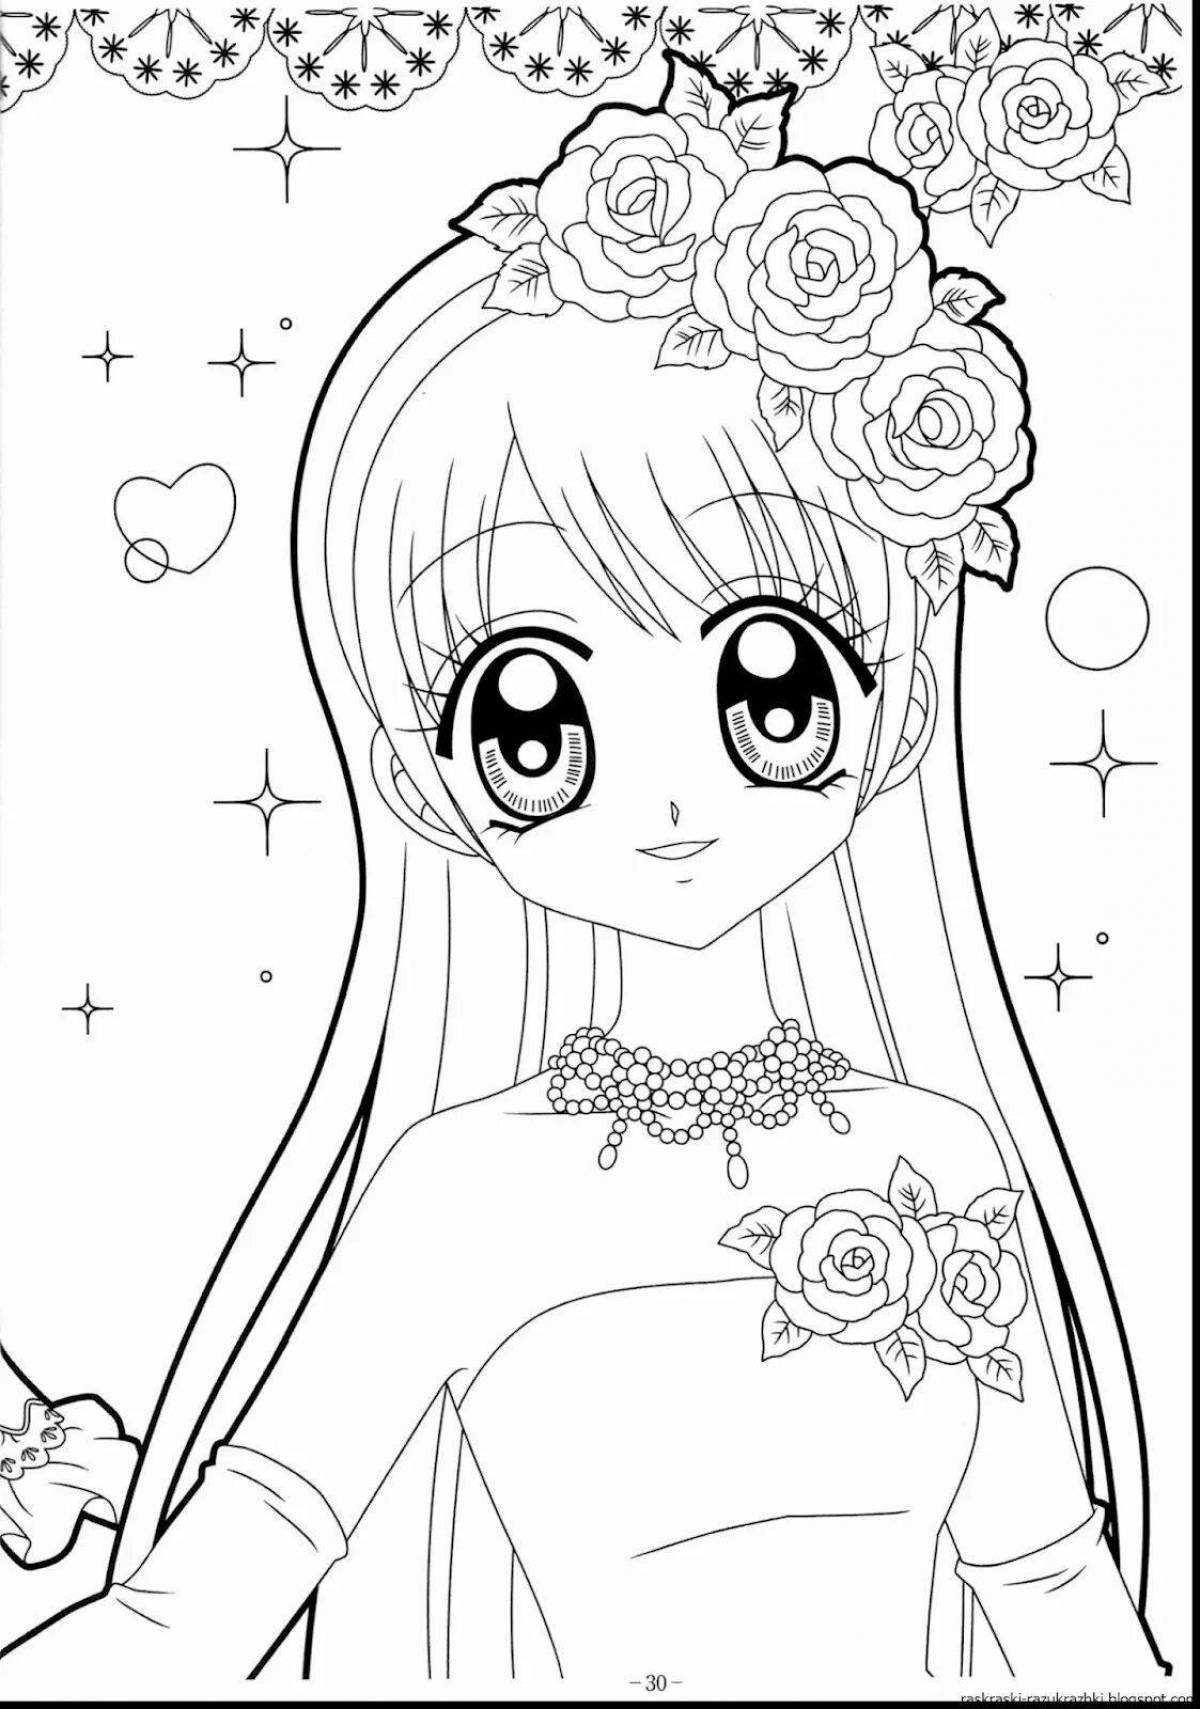 Nice 12 year old cute coloring pages